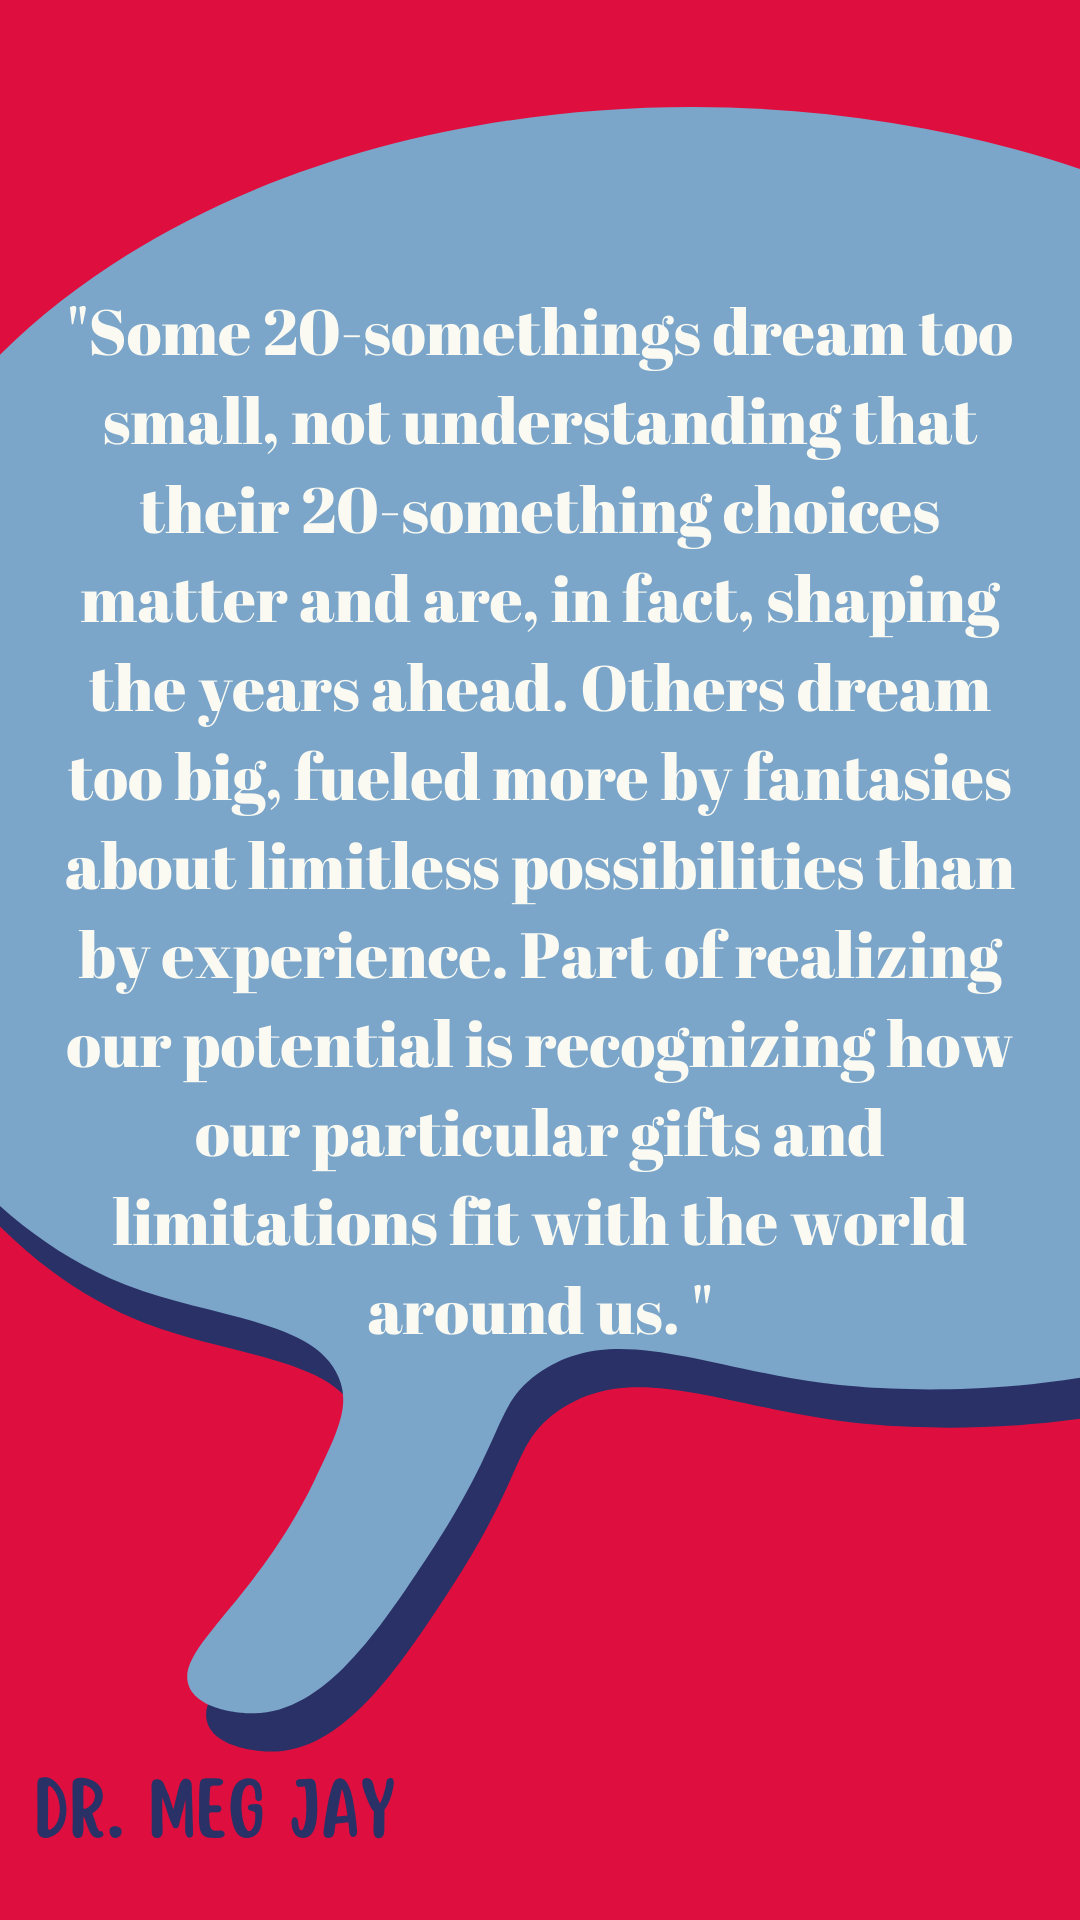 “Some 20-somethings dream too small, not understanding that their 20-something choices matter and are, in fact, shaping the years ahead. Others dream too big, fueled more by fantasies about limitless possibilities than by experience. Part of realizing our potential is recognizing how our particular gifts and limitations fit with the world around us. We realize  where our authentic potential actually lies,” said Dr. Meg Jay.